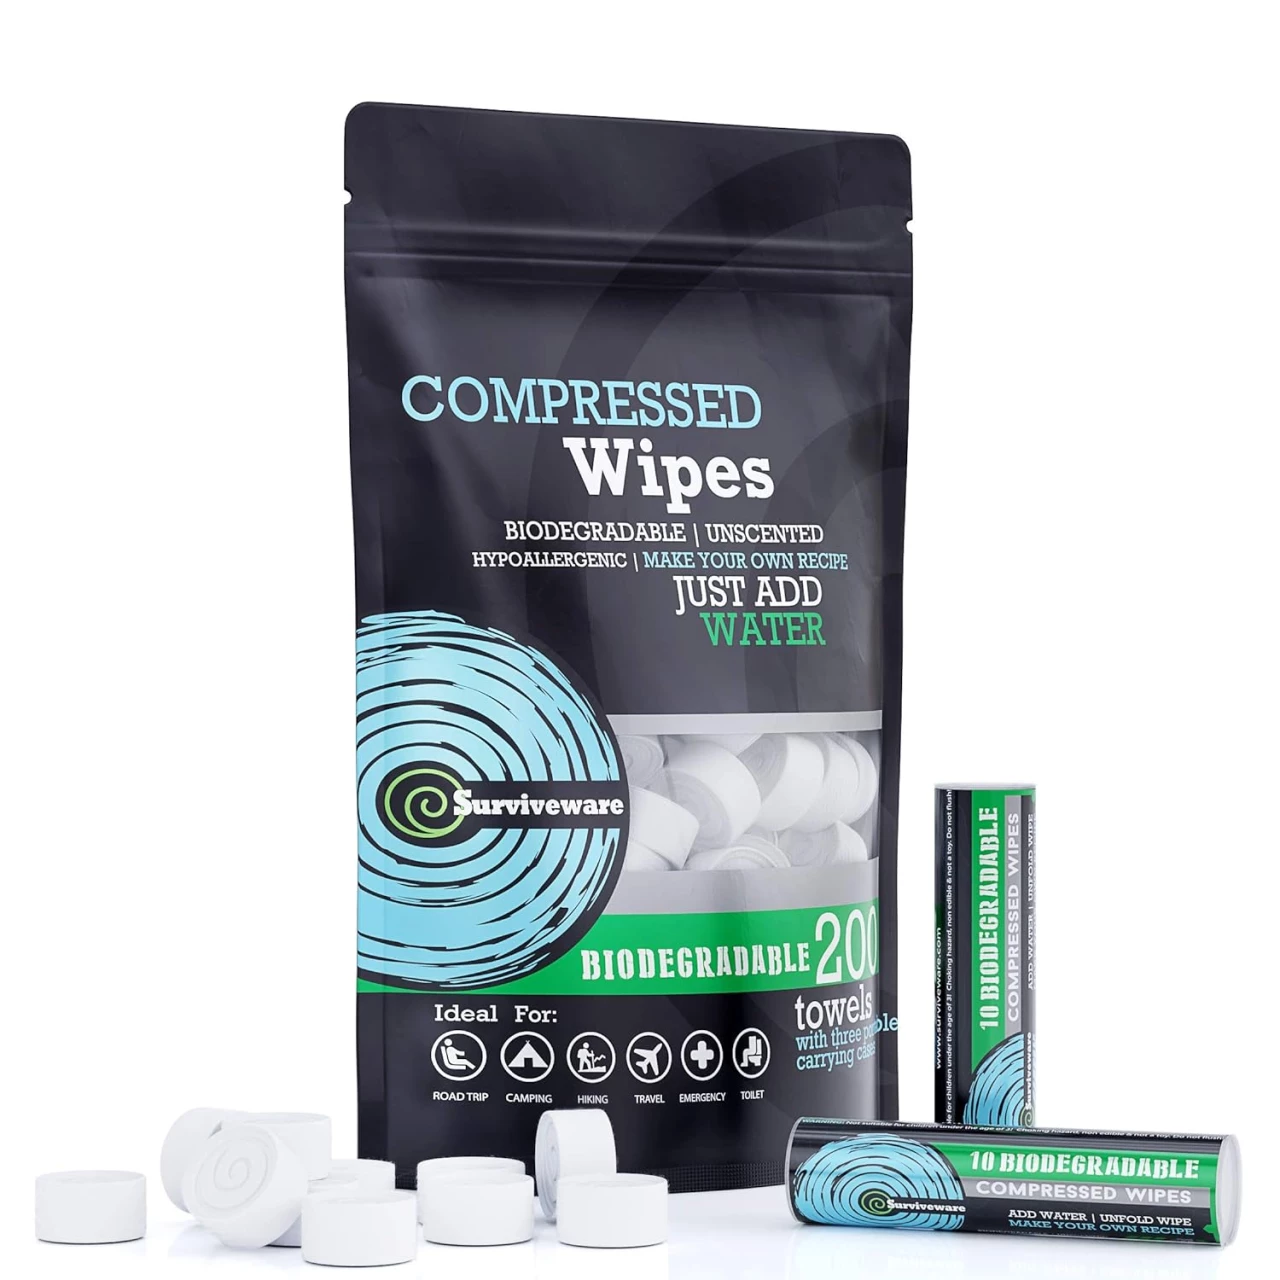 Surviveware Biodegradable Compressed Wipes, Paper Towel Coin Tissue, Face and Body Wipes for Post Workout and Camping, Wipes for Adults, Large Wipes, 200 Count